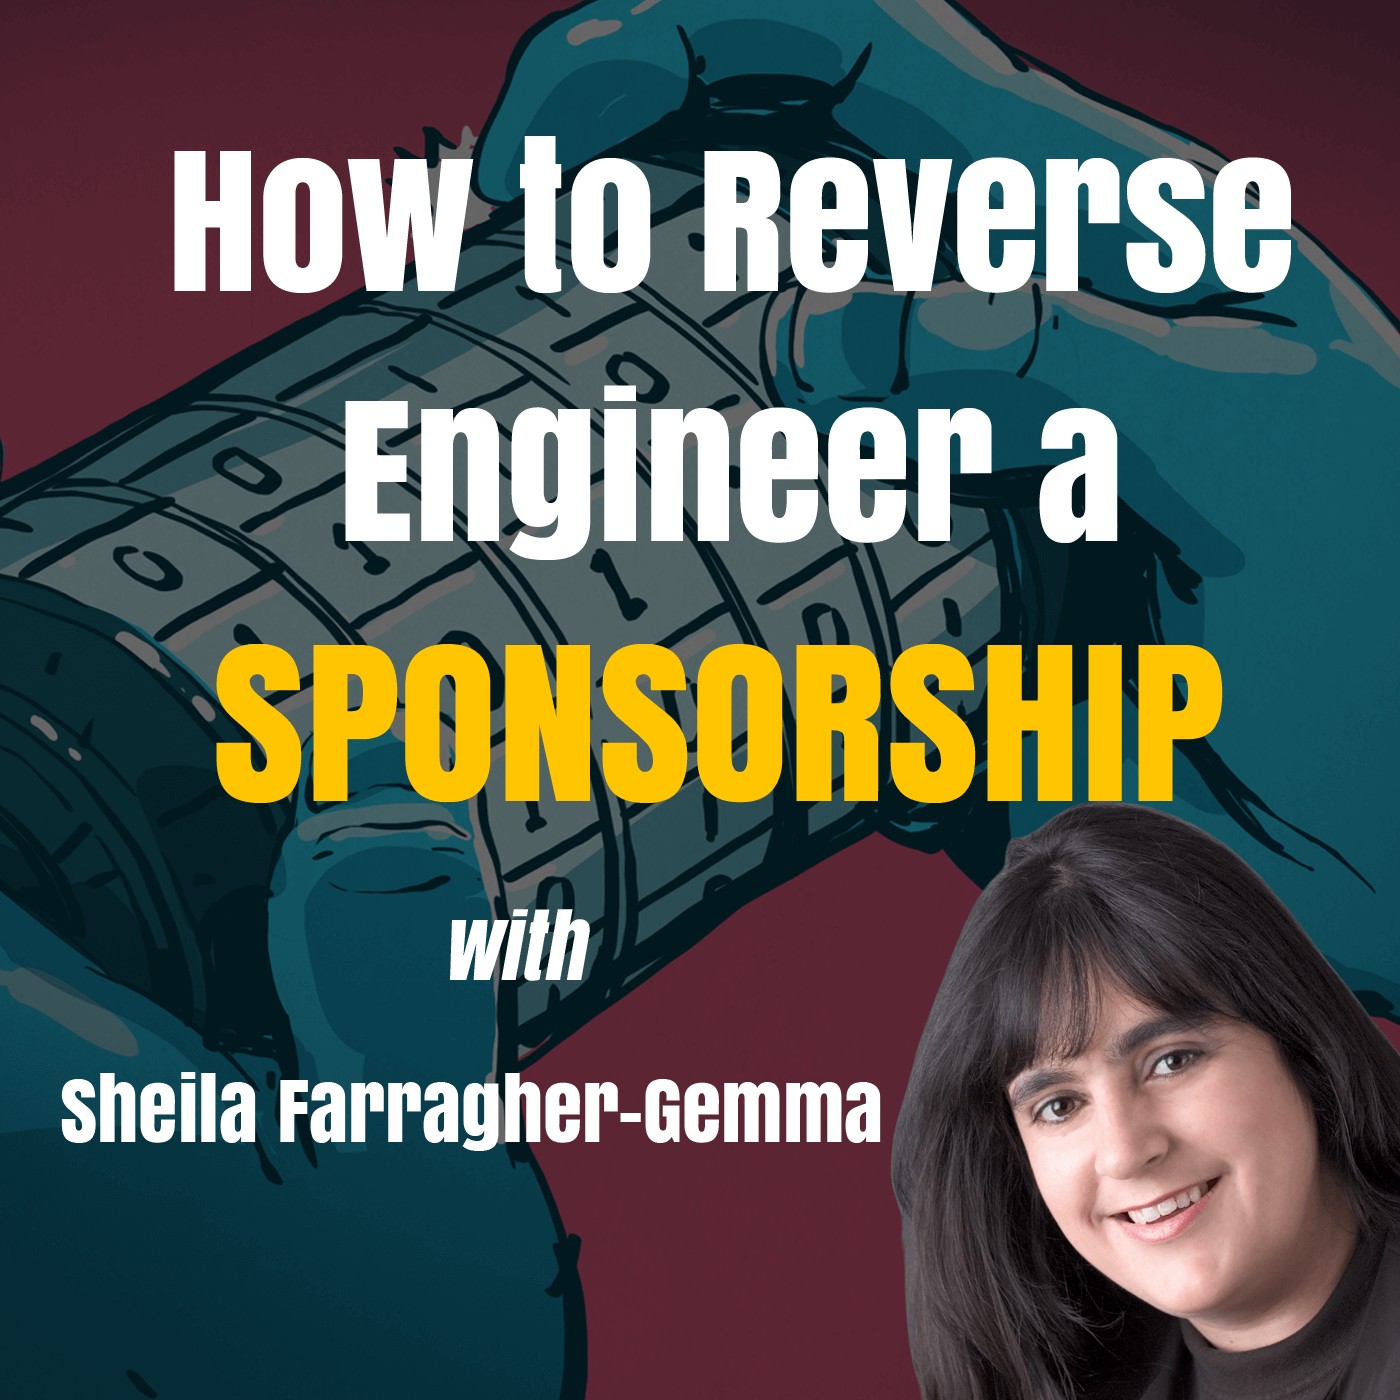 How to reverse engineer a sponsorship with Sheila Farragher-Gemma